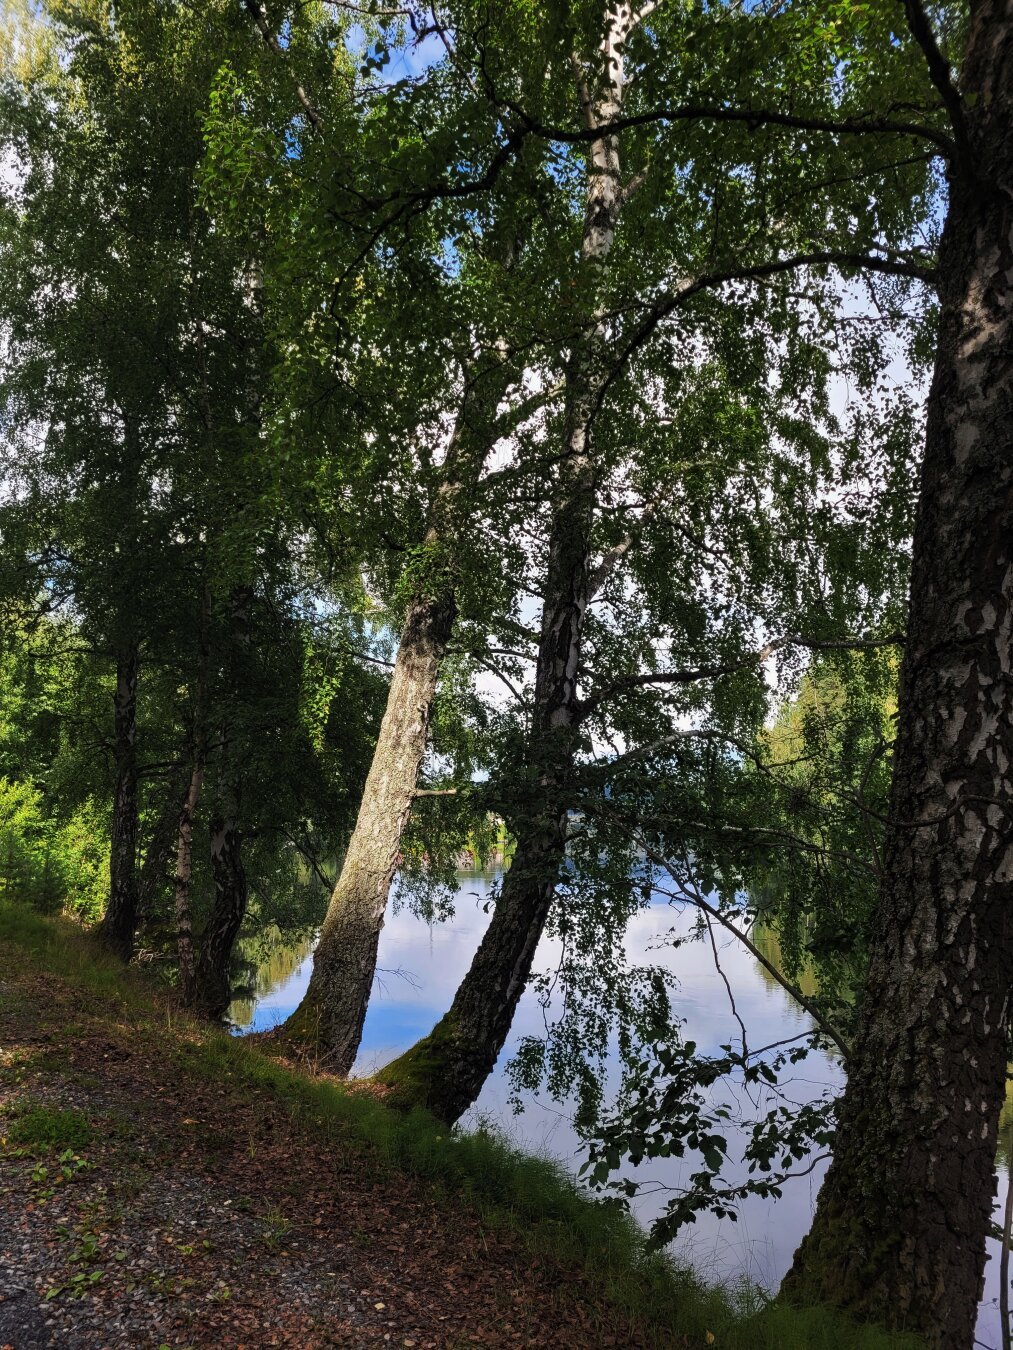 A row of trees on the river bank, only one of which is illuminated by the sun shining from the left, outside the picture. The river seen through the trees is calm and the slightly cloudy sky is reflected in it